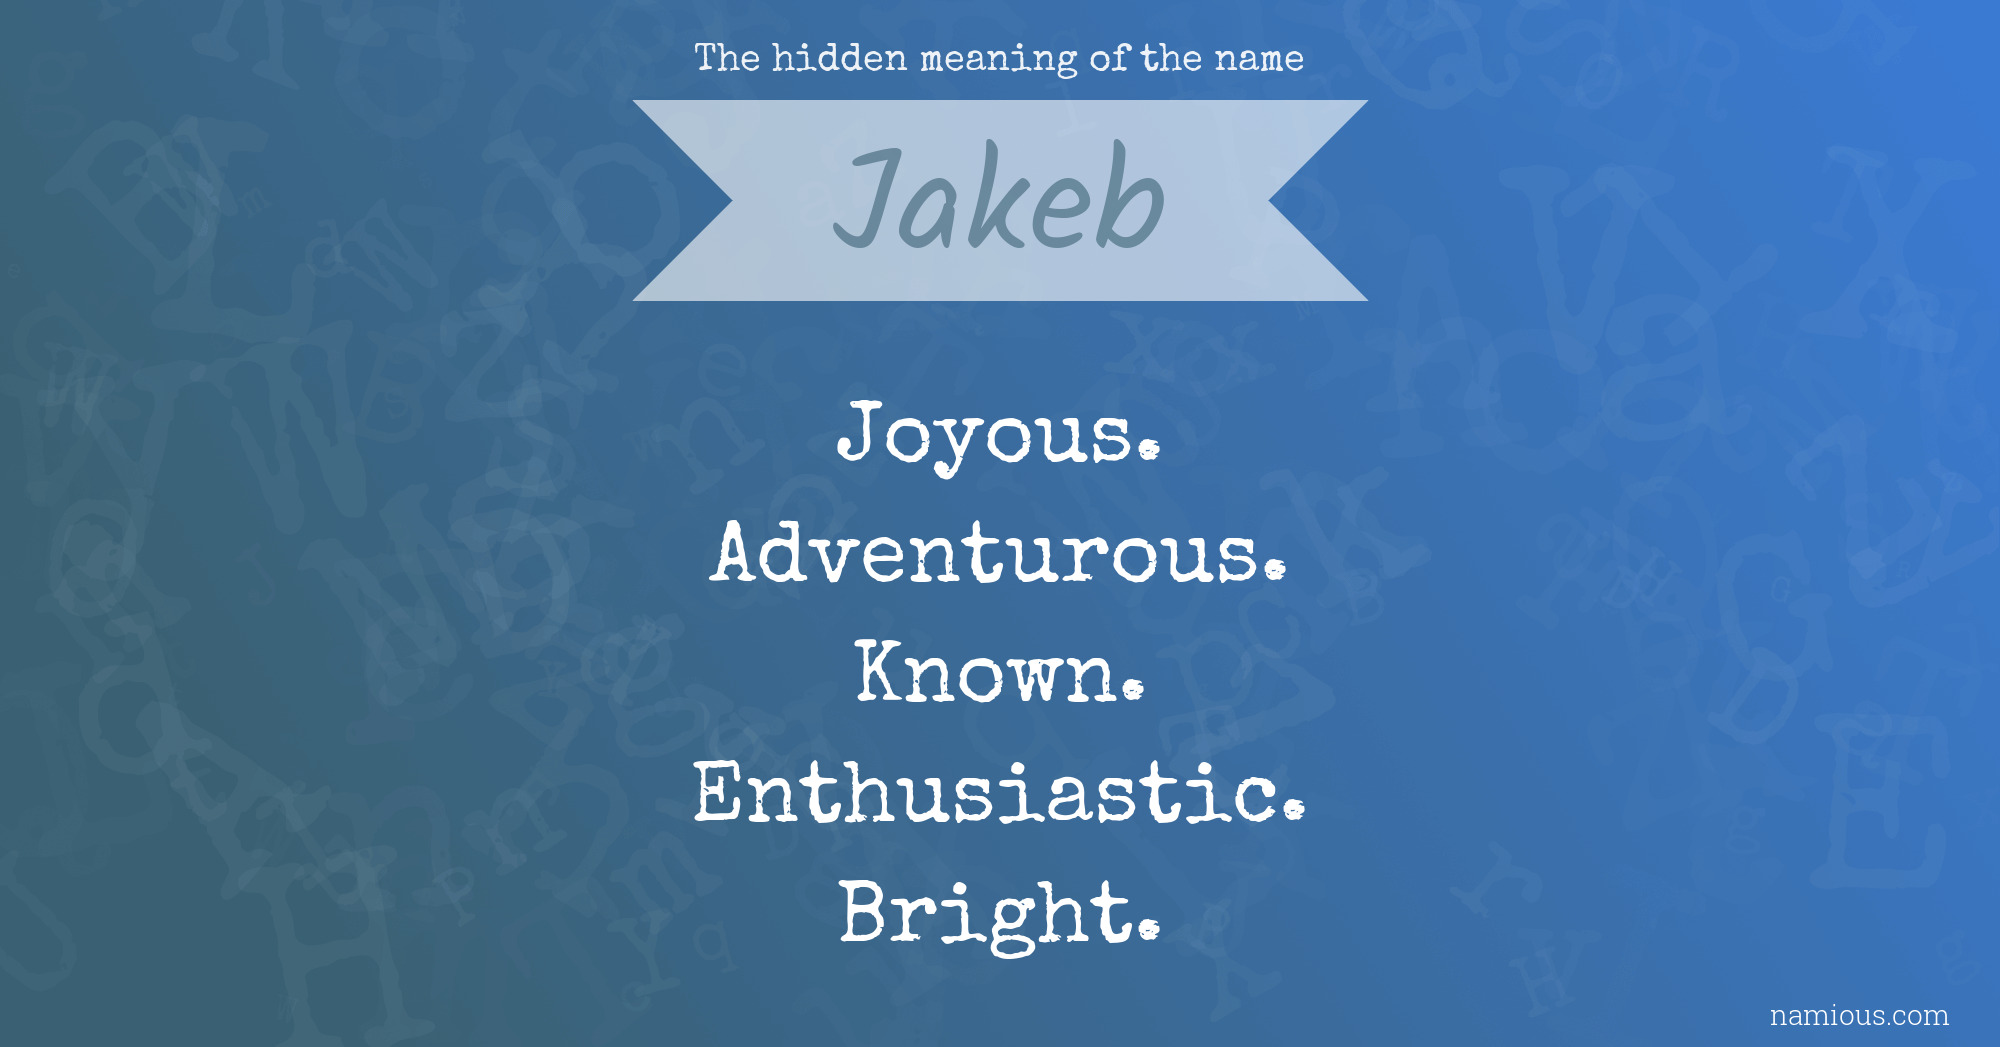 The hidden meaning of the name Jakeb